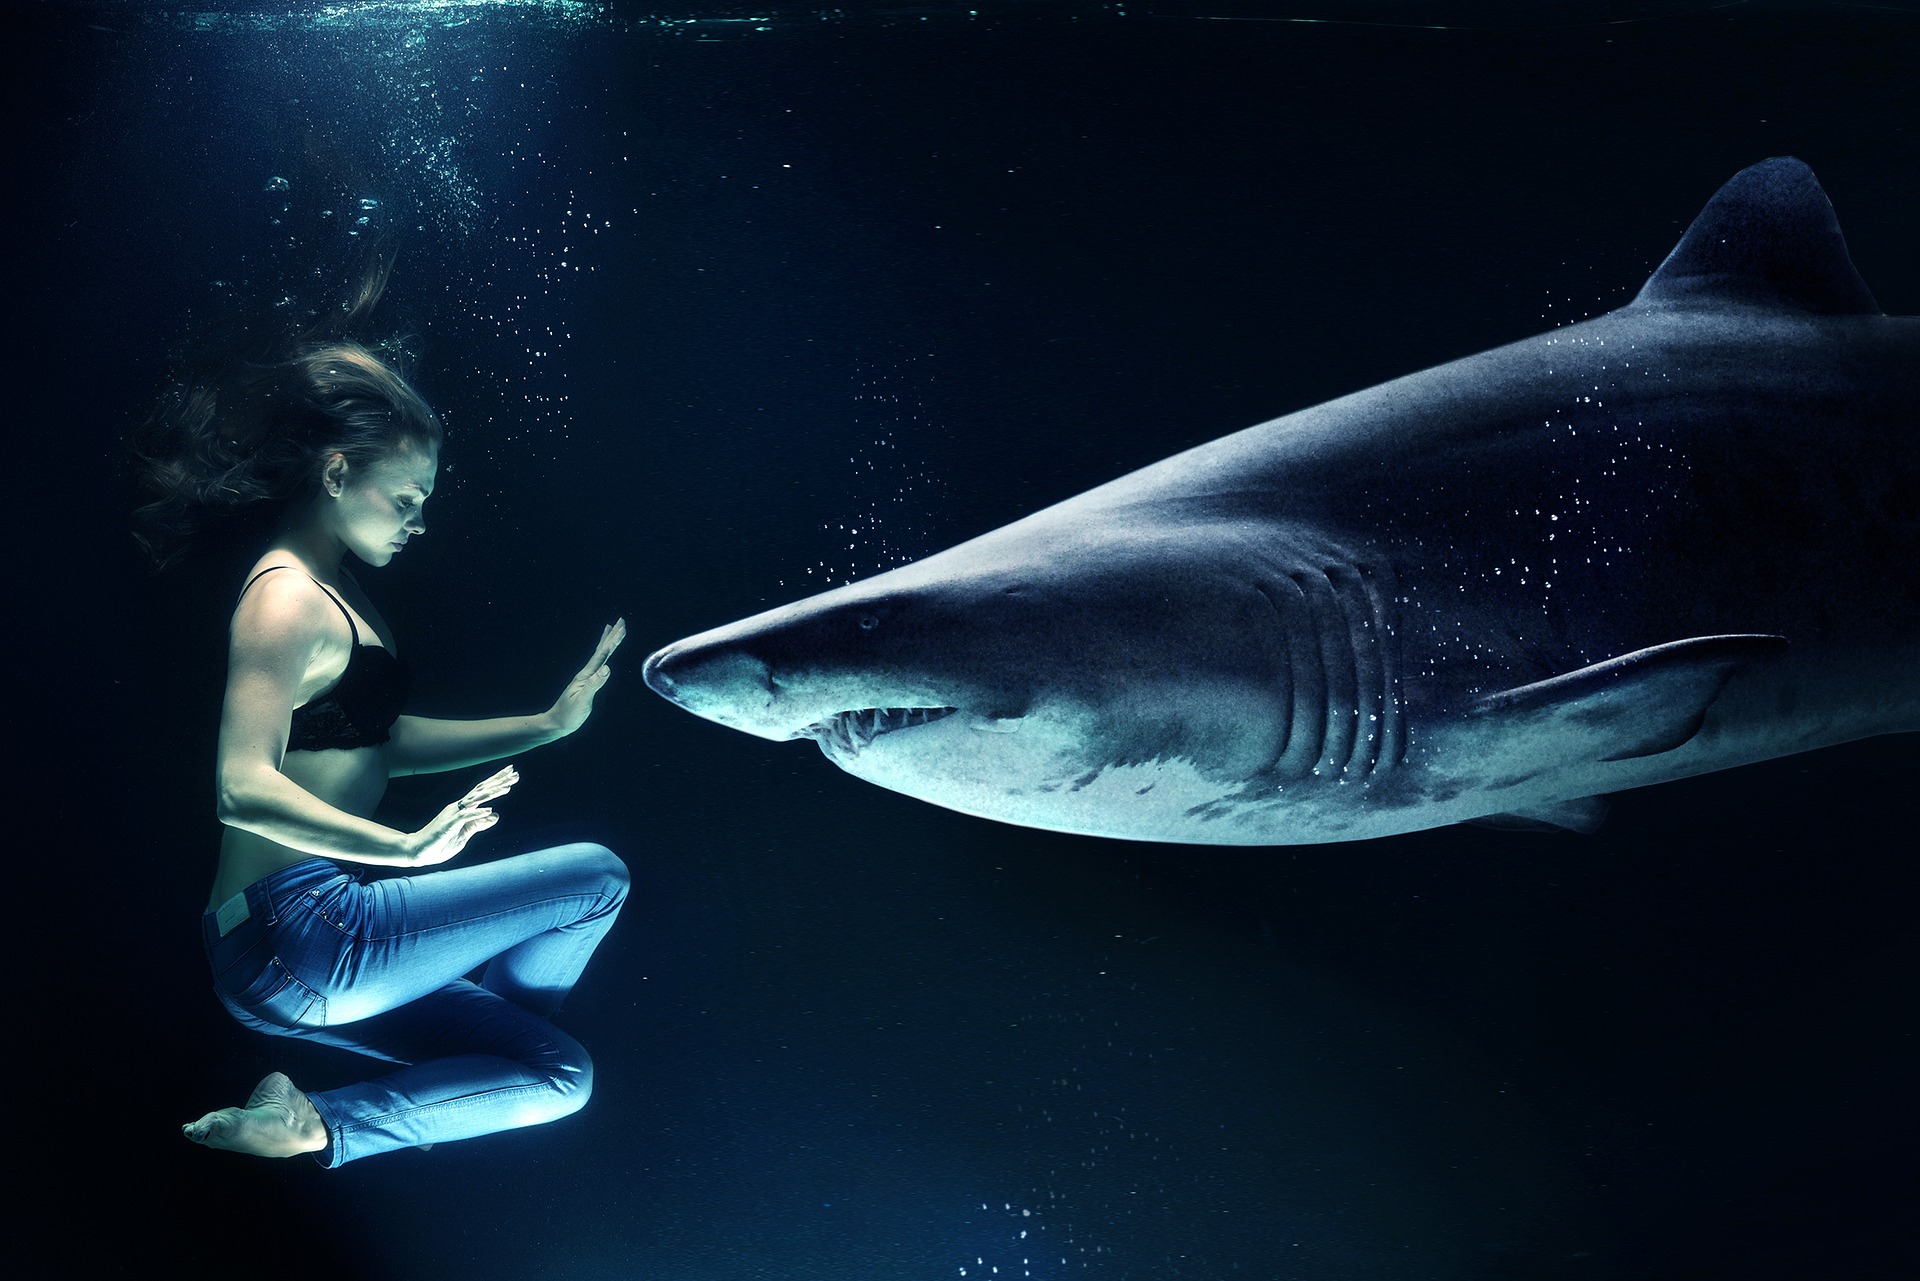 A woman underwater facing a great white shark.